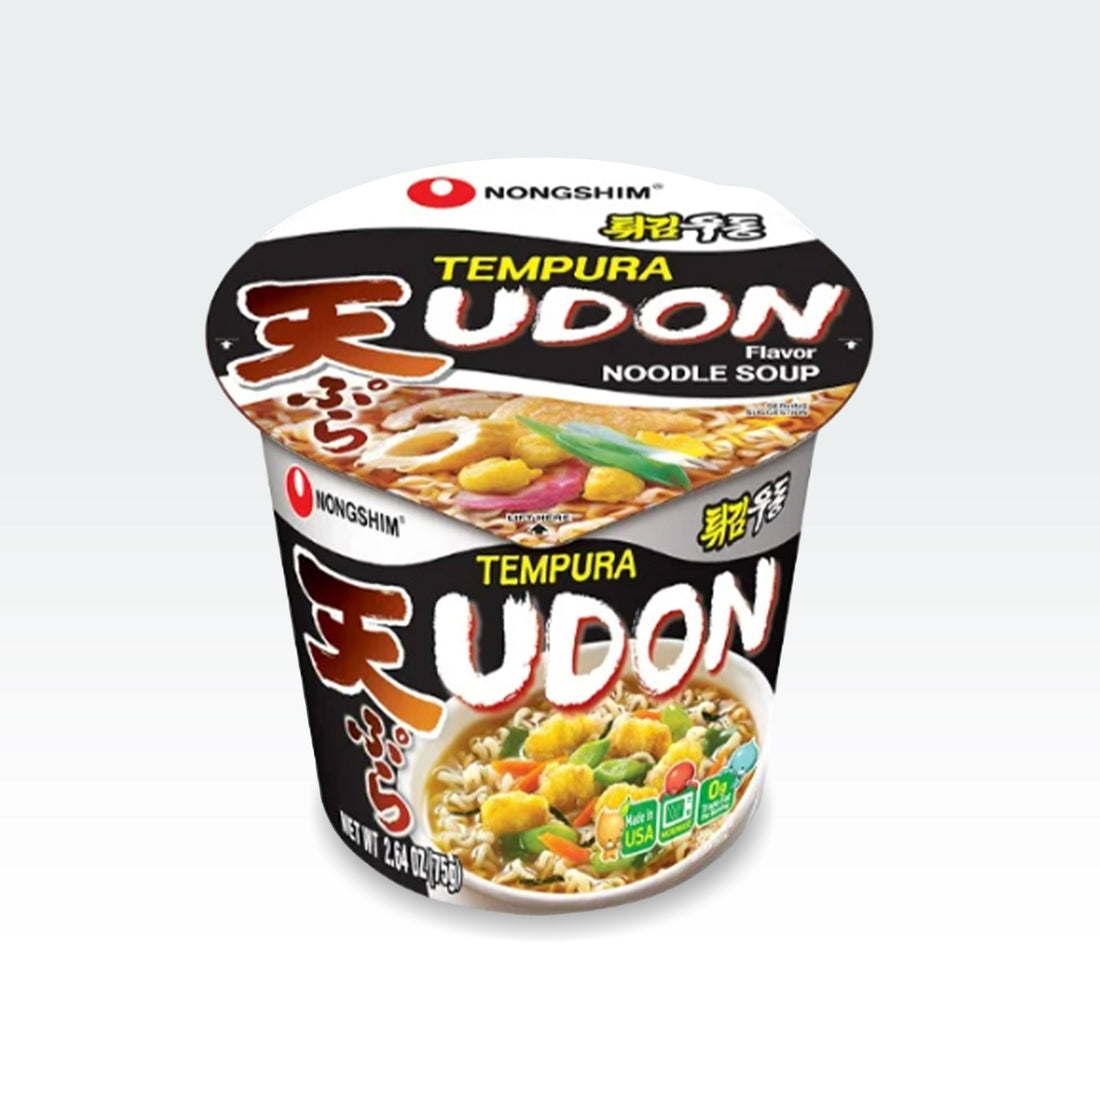 Tempura Udon Cup Noodle Cup 2.6oz(75g) x 6 Cups - Anytime Basket